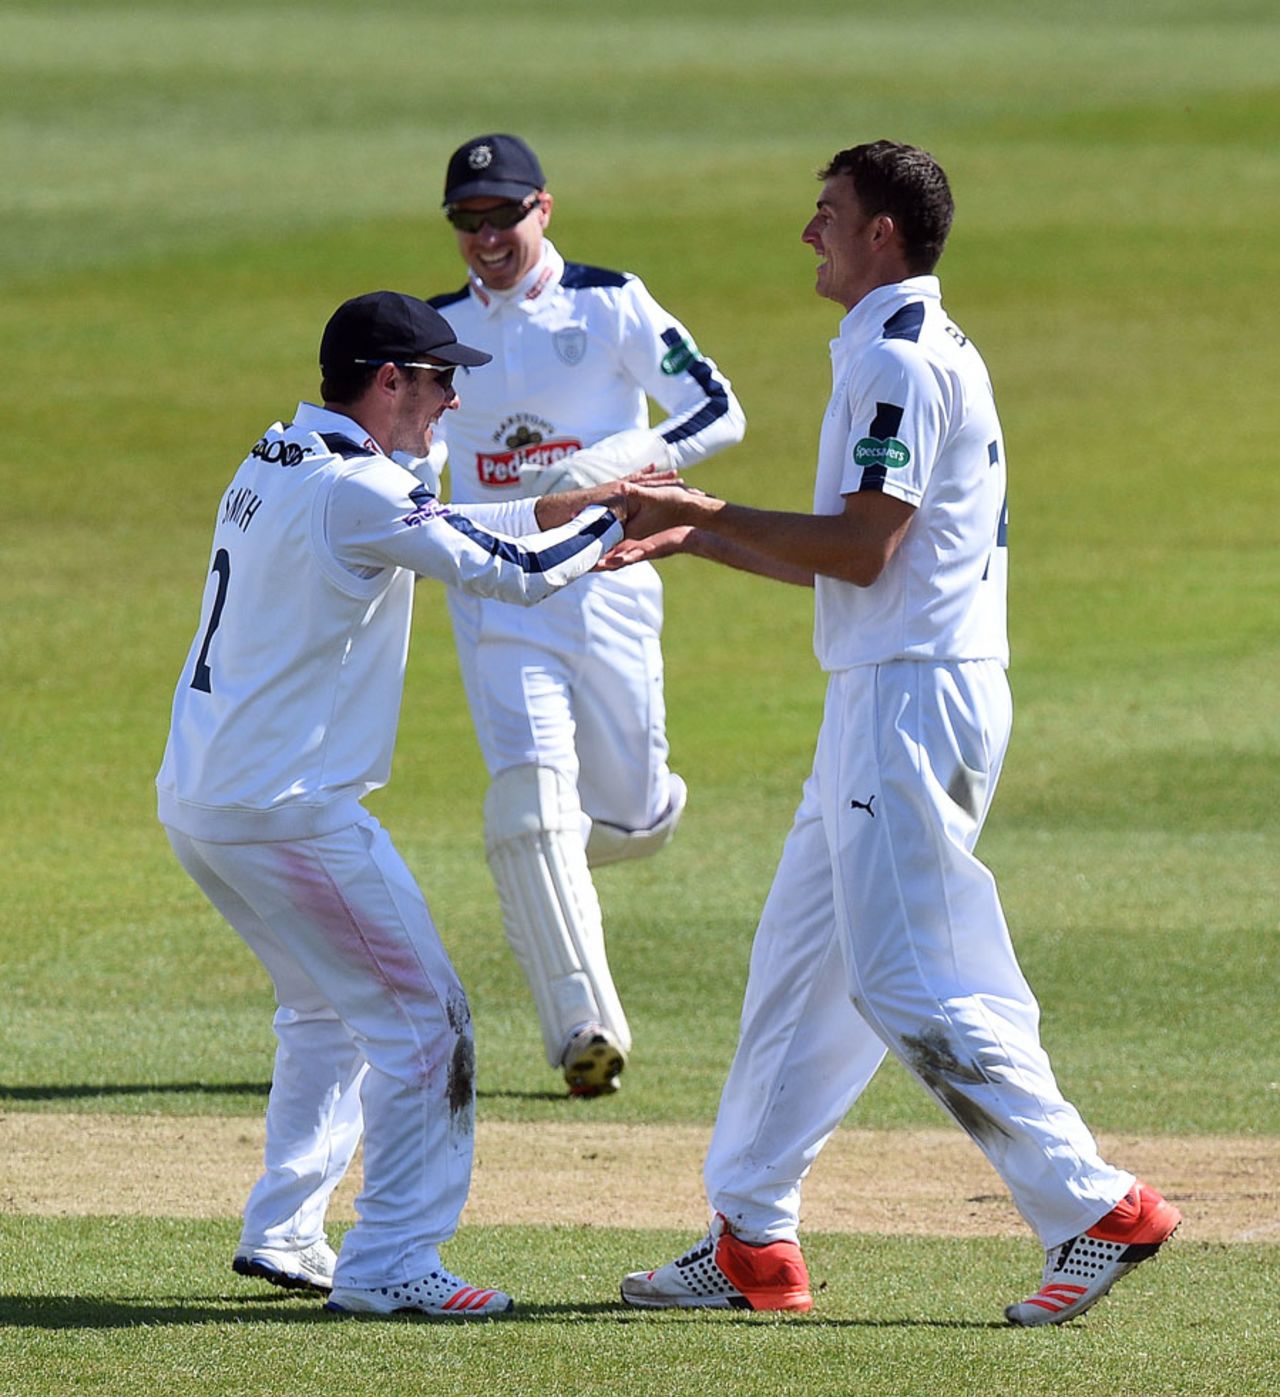 Ryan McLaren celebrates the wicket of Sam Hain, Specsavers County Championship, Division One, Ageas Bowl, 3rd day, April 12, 2016